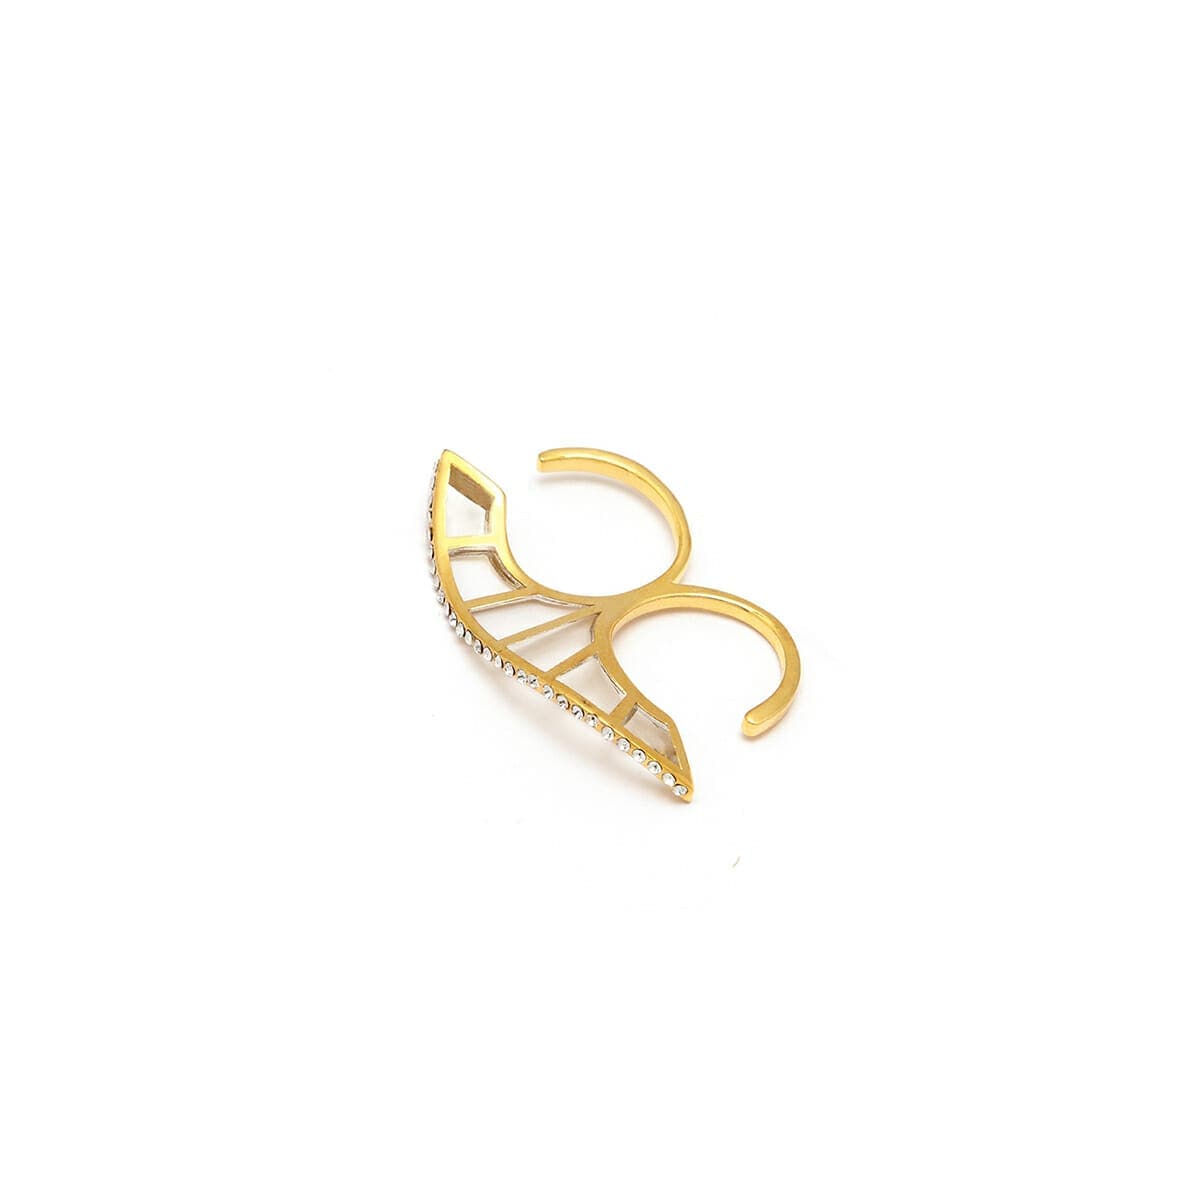 Devi Diva Clear Resin Double Finger Ring - Isharya | Modern Indian Jewelry